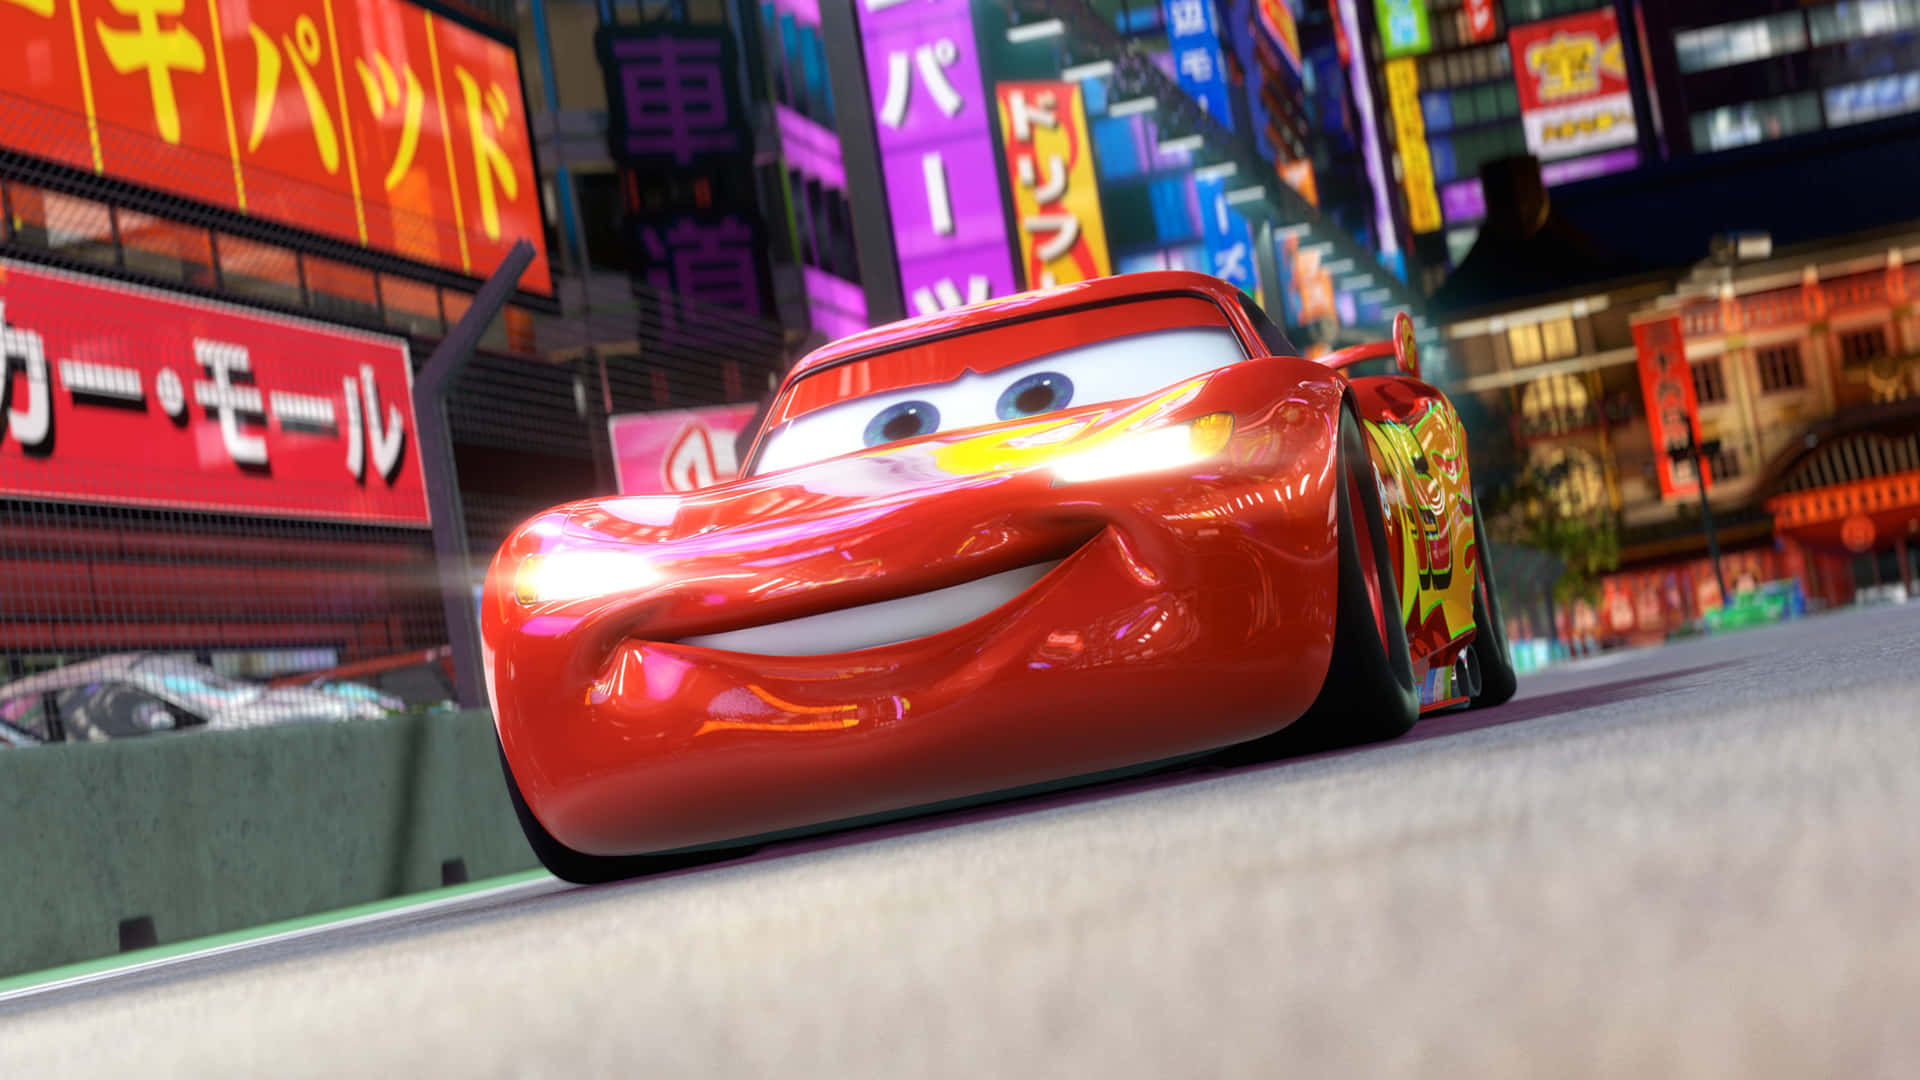 Cars 3 - A Red Car Driving Down A City Street